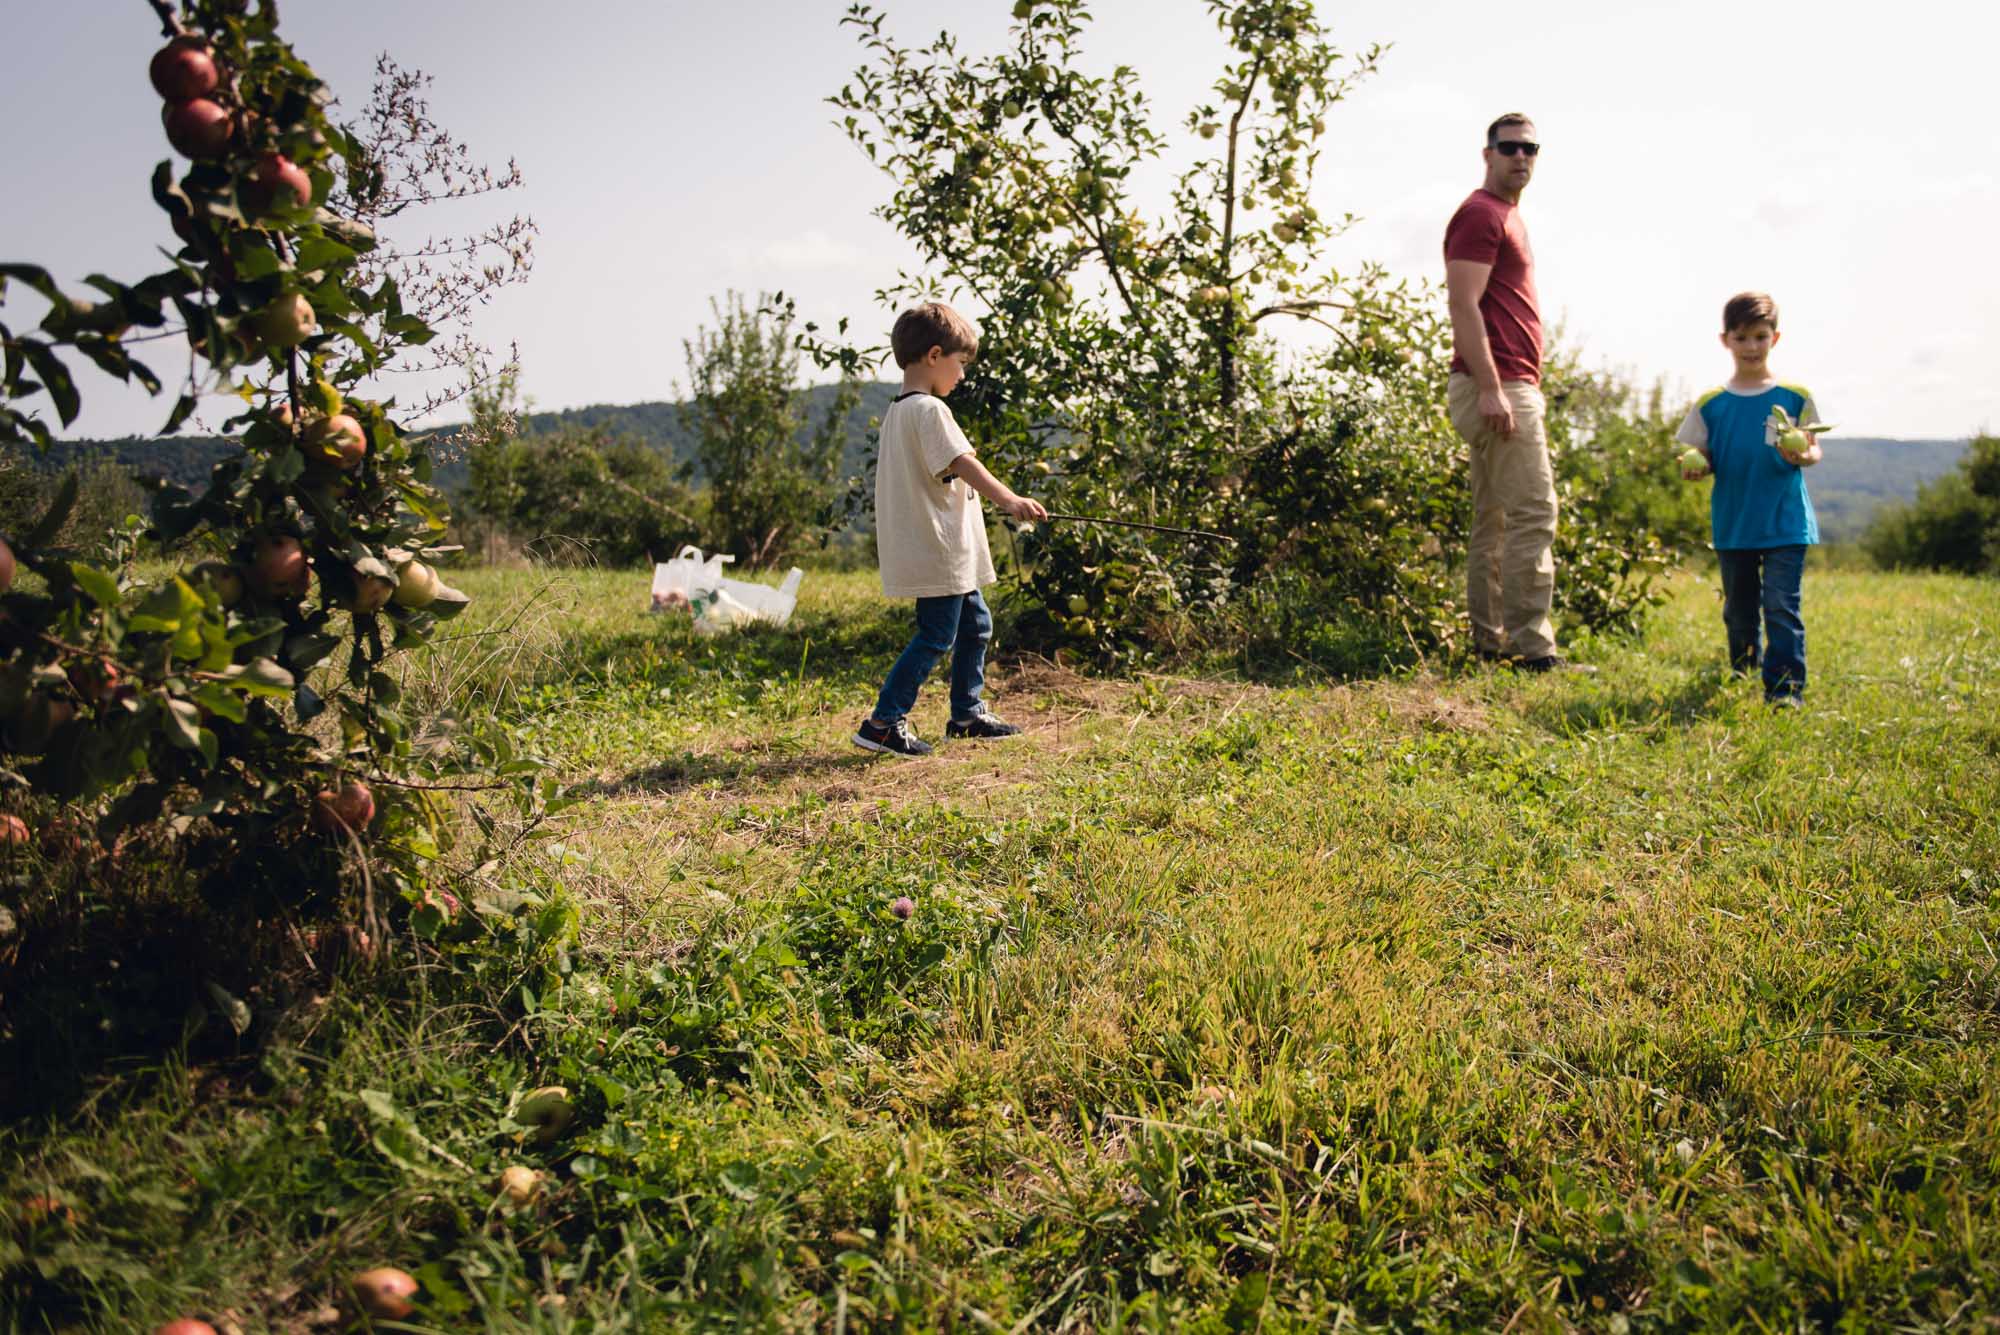 pictures of fall farm activities in Virginia by megan cieloha